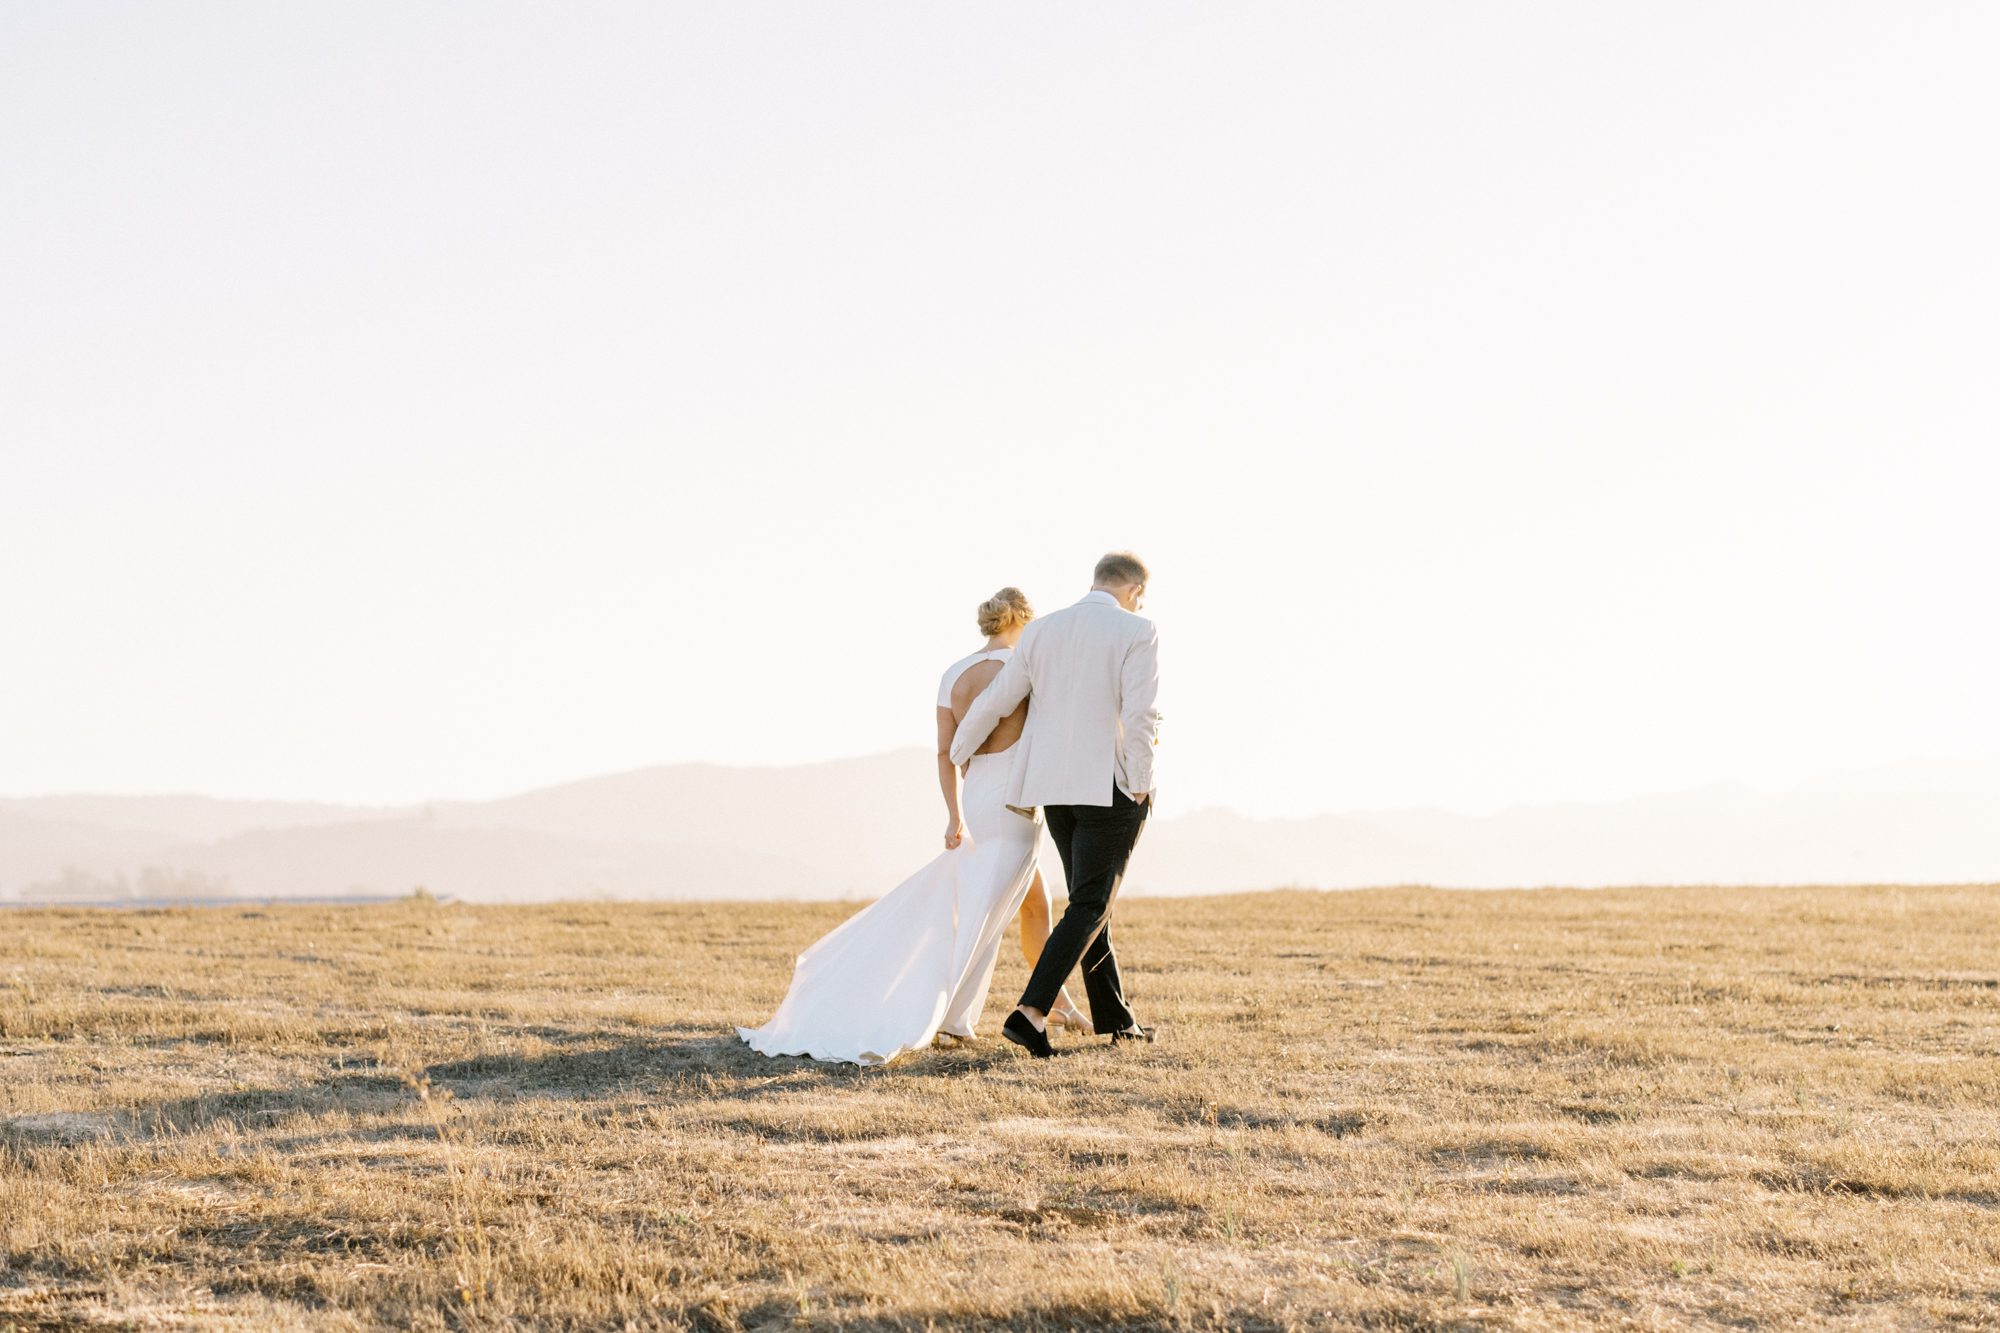 Sunset portraits at Flying Caballos Ranch by Loveridge Photography - Bride in Sarah Seven dress and groom is J Crew Suit